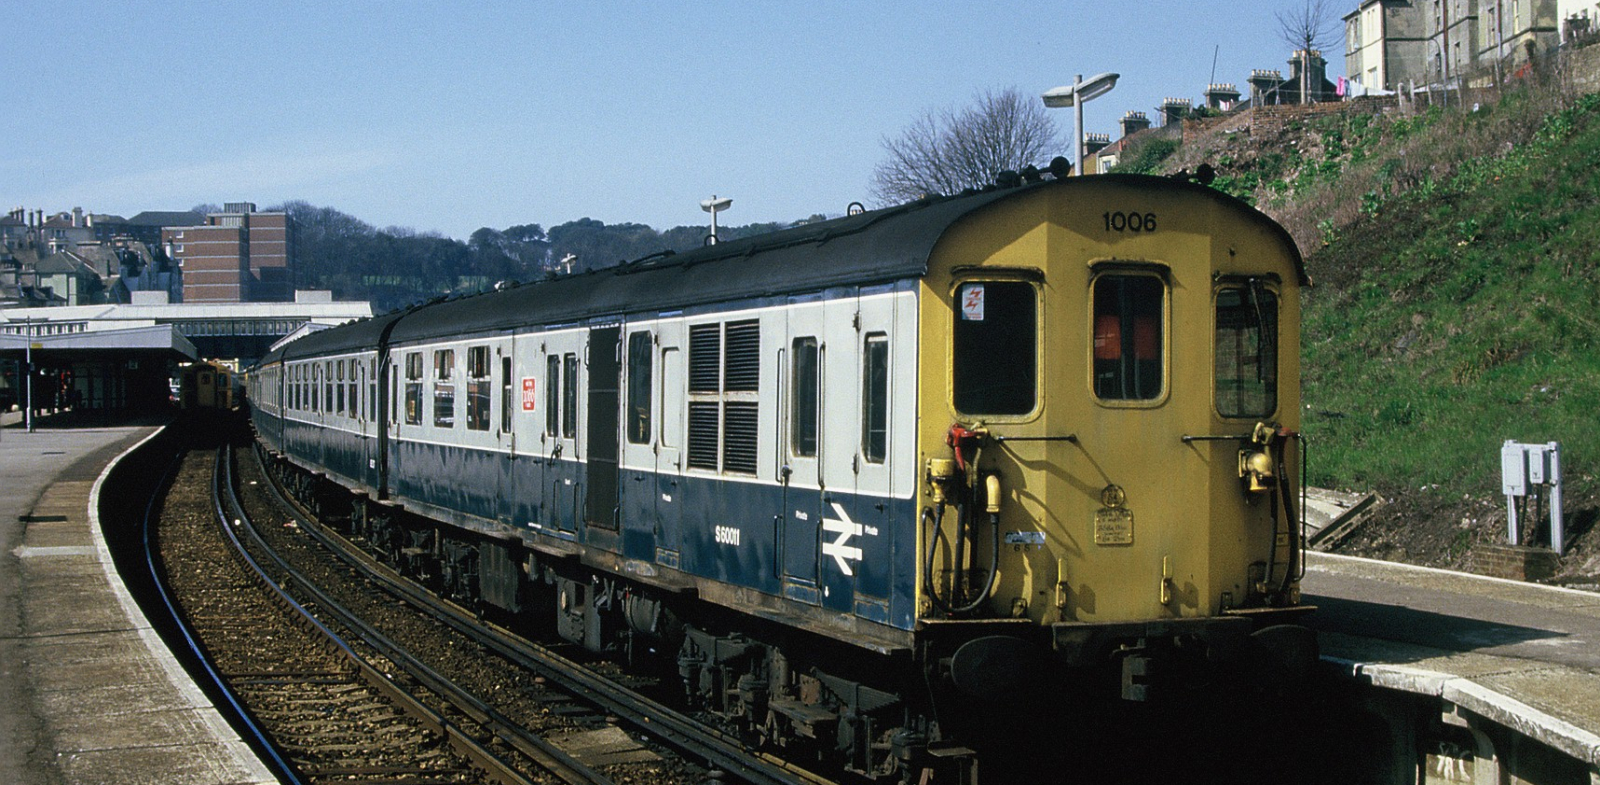 Class 201 No. 1006 in April 1986 at Hastings